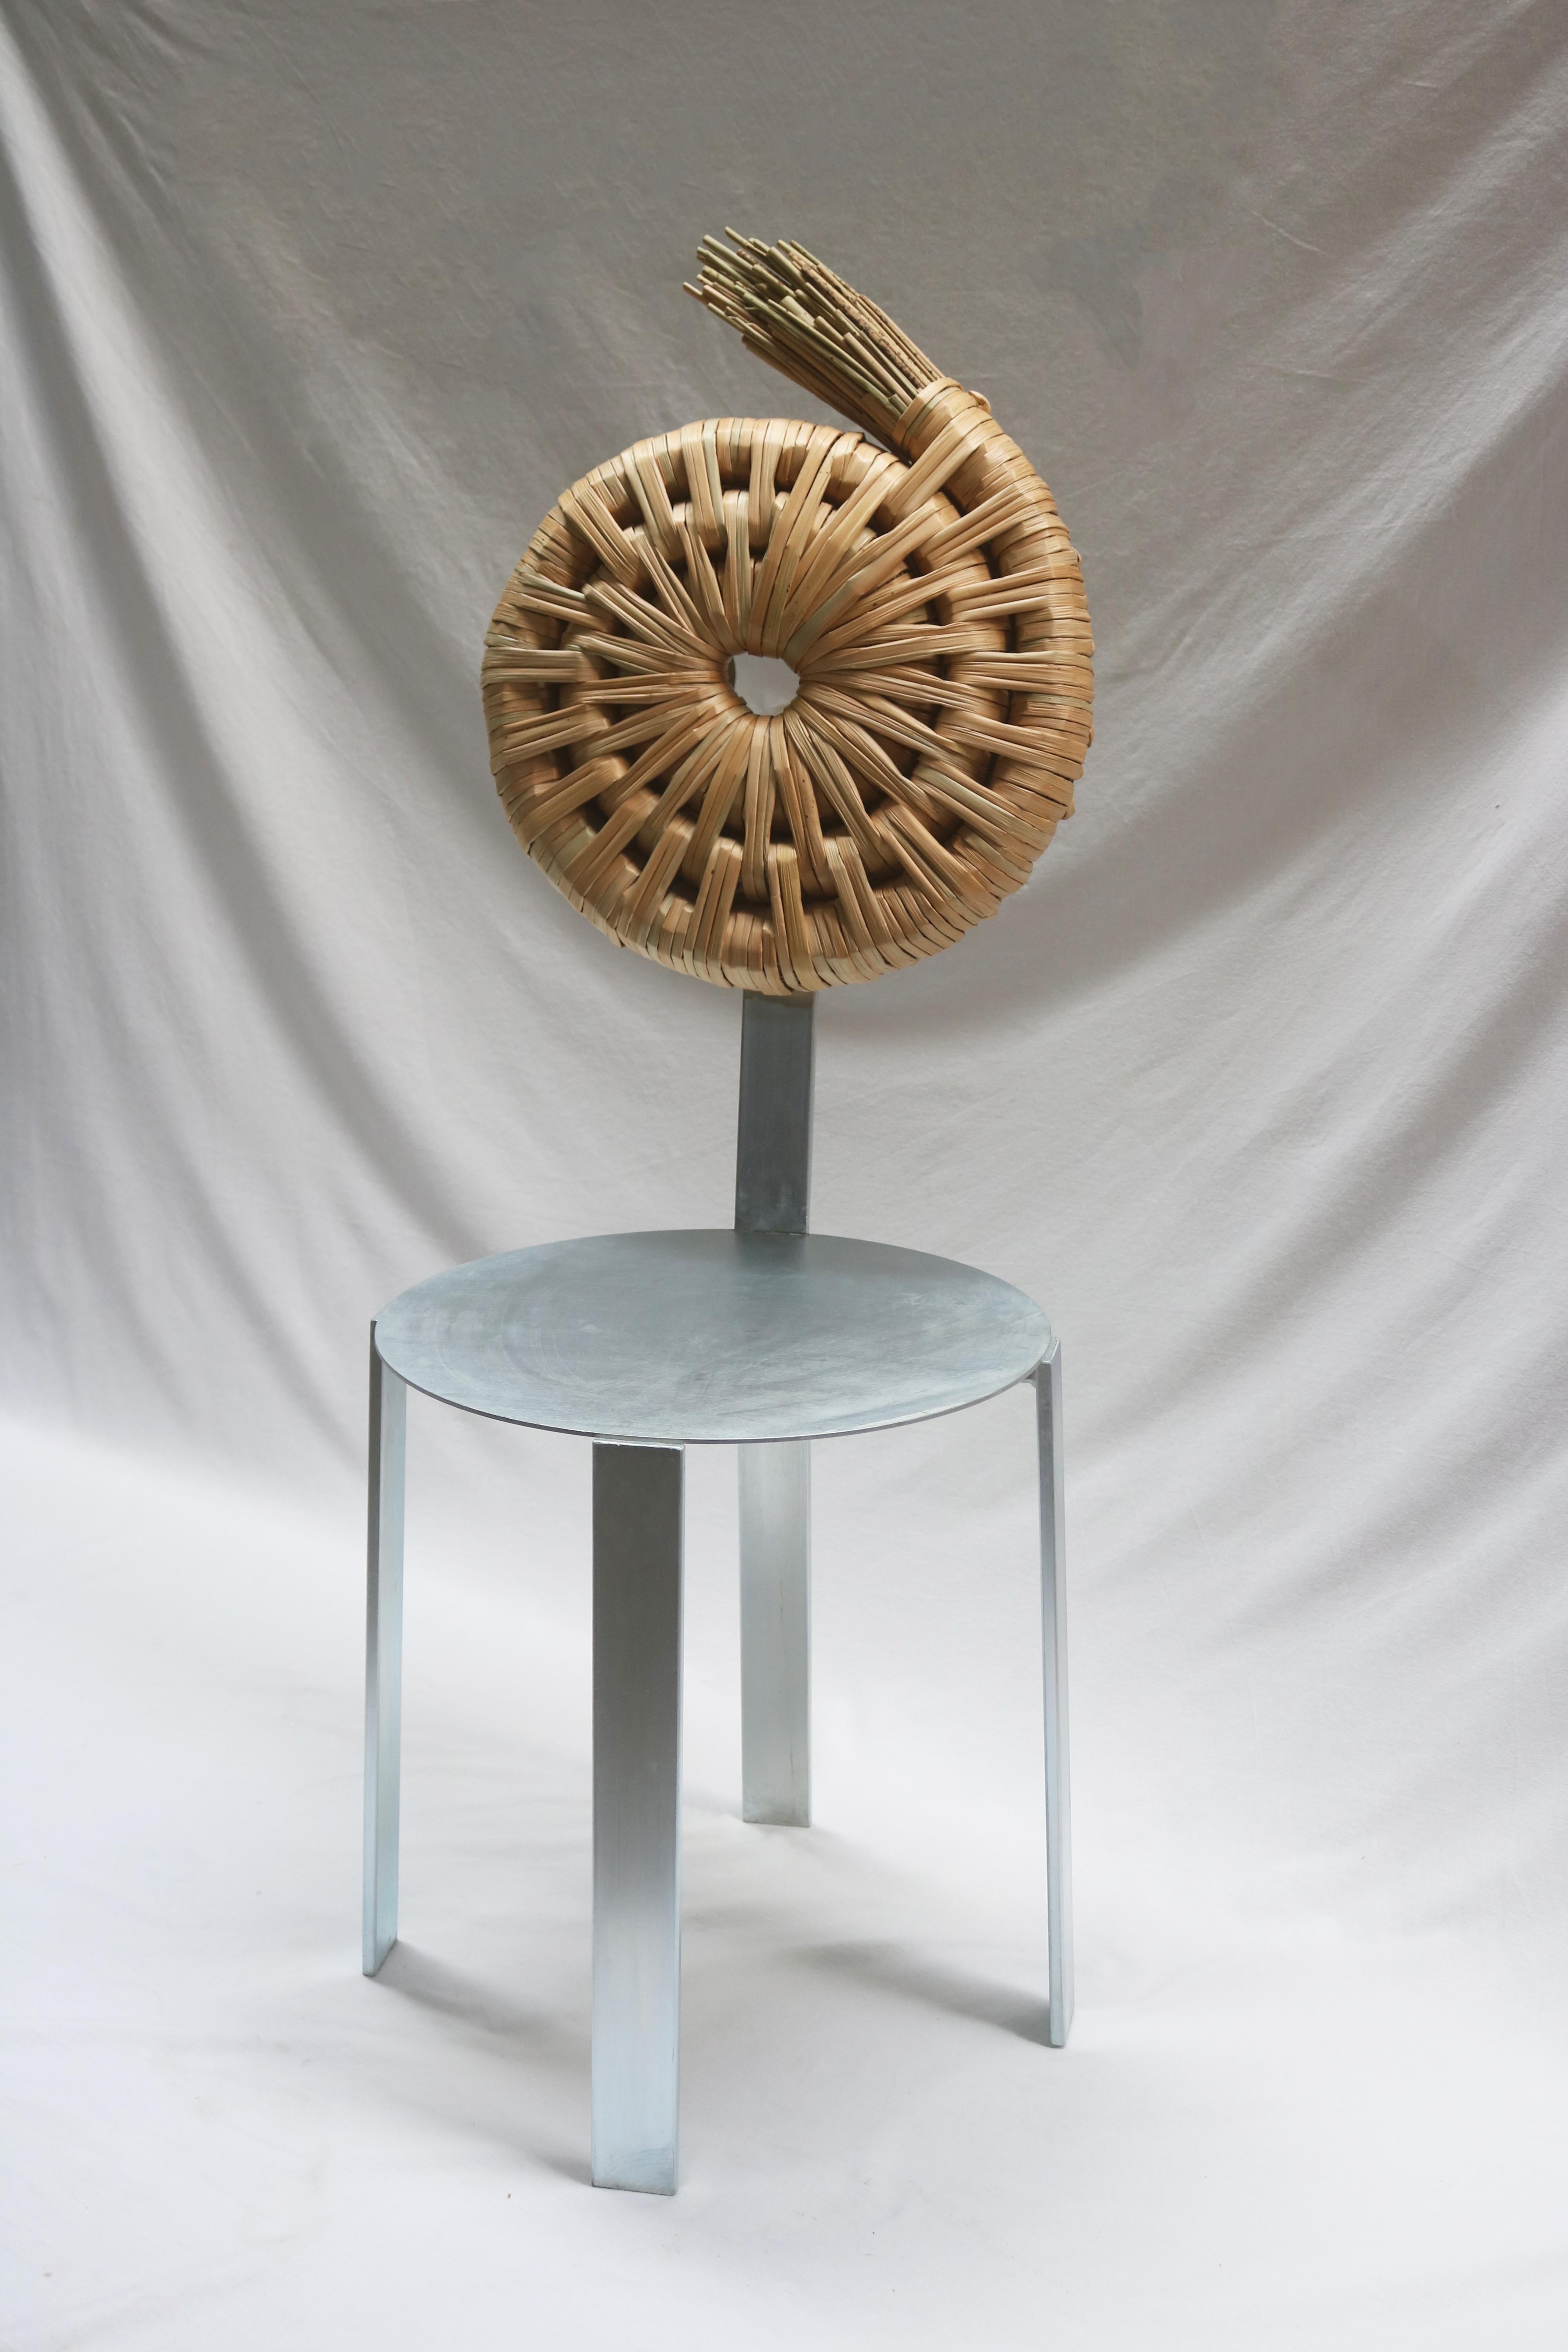 Cadeira Chair by Macheia
Handmade In Portugal.
Dimensions: D 45 x W 45 x H 88 cm.
Materials: Natural dried bulrush and galvanized iron.

The chair’s concept is rooted in the notion that every spiral starts around a hand. The hole, the
imprint of the